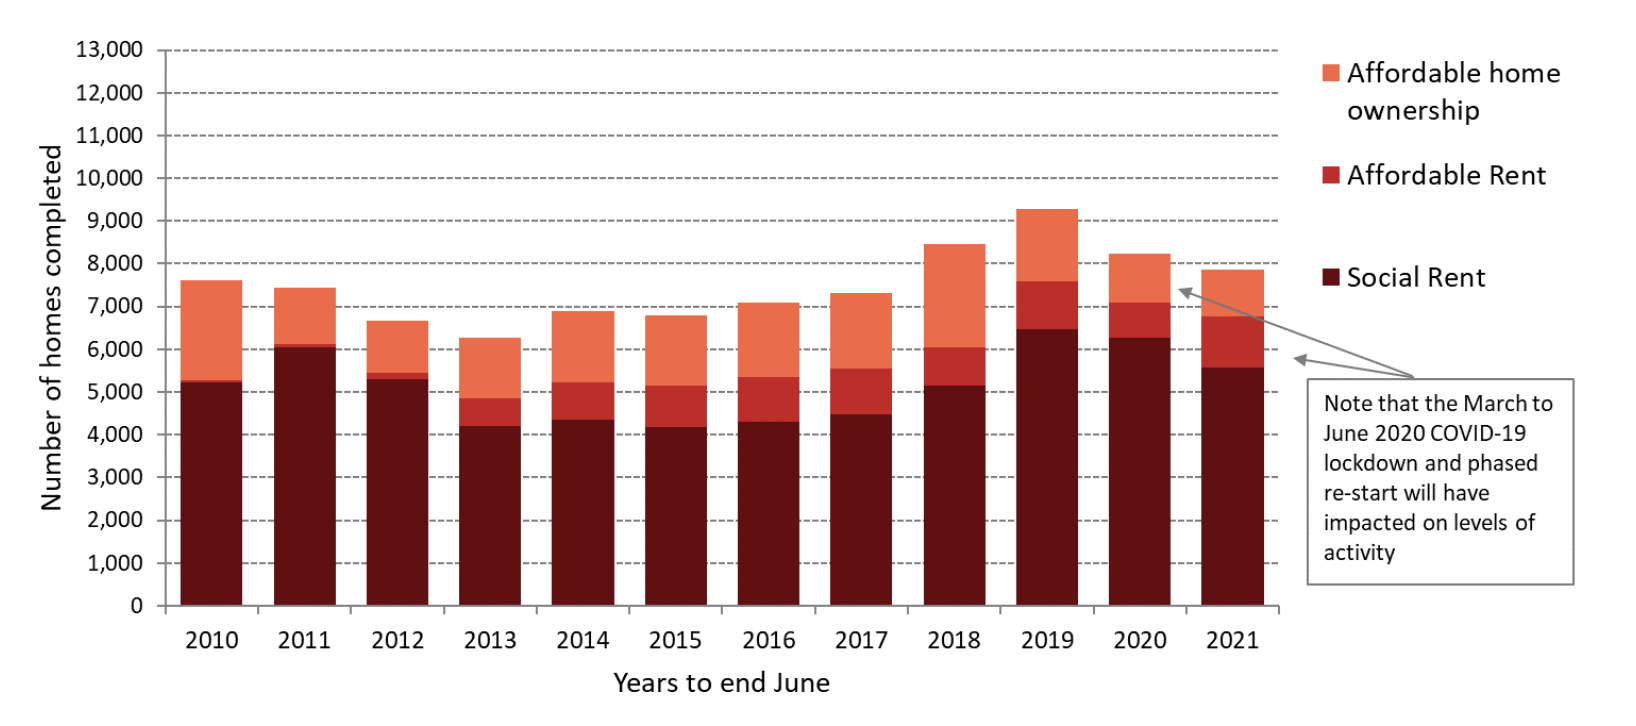 Type of AHSP completions in the years to end June from 2010 to 2021